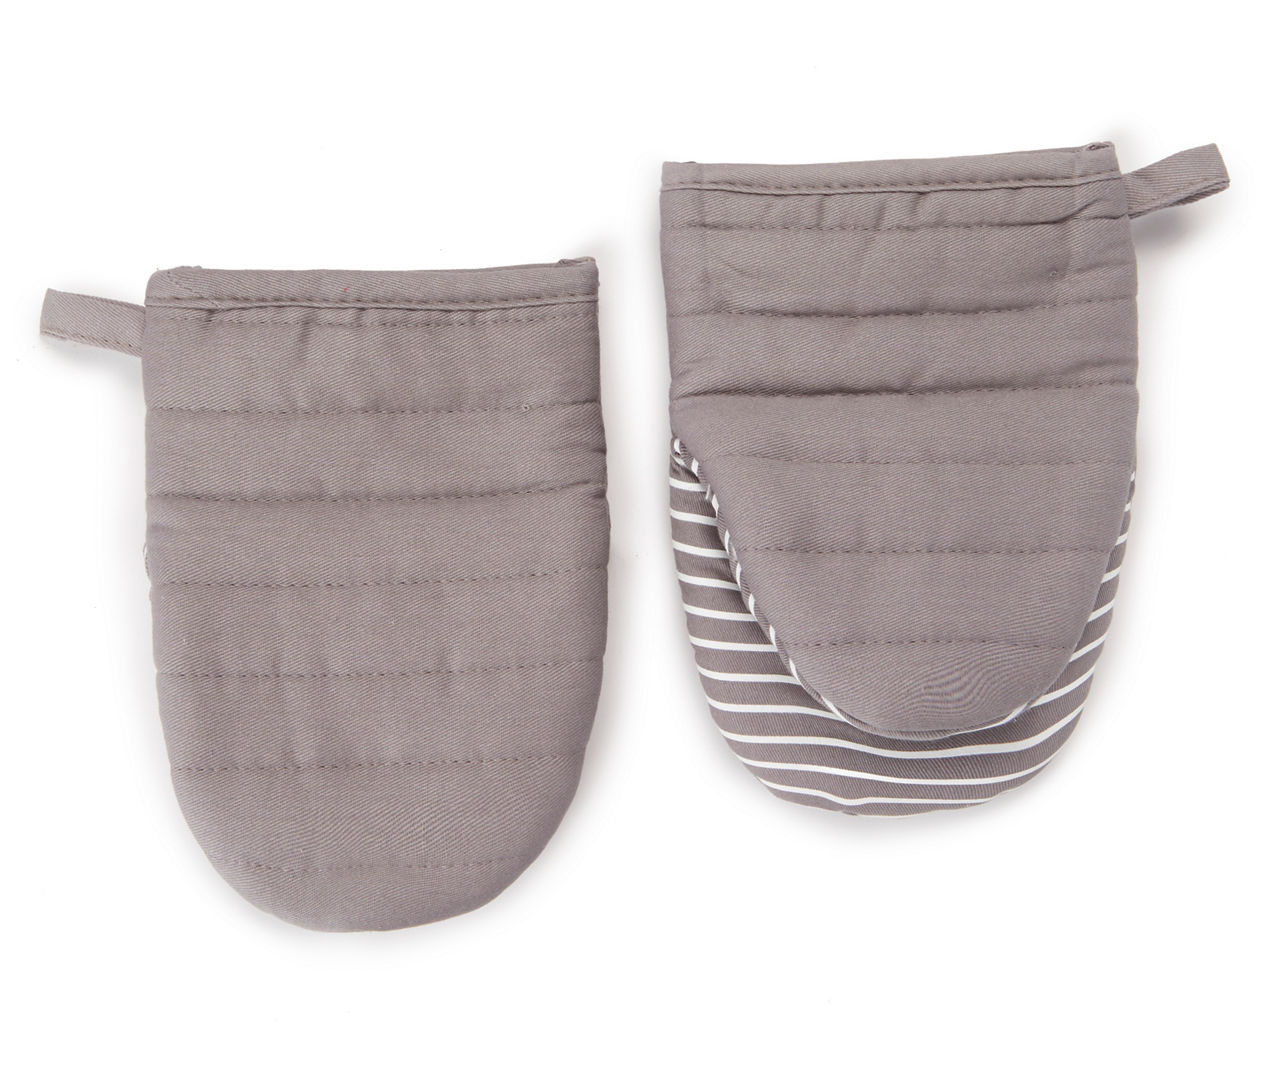 Emeril Lagasse Gray Chambray Mini Oven Mitts, 2-Pack